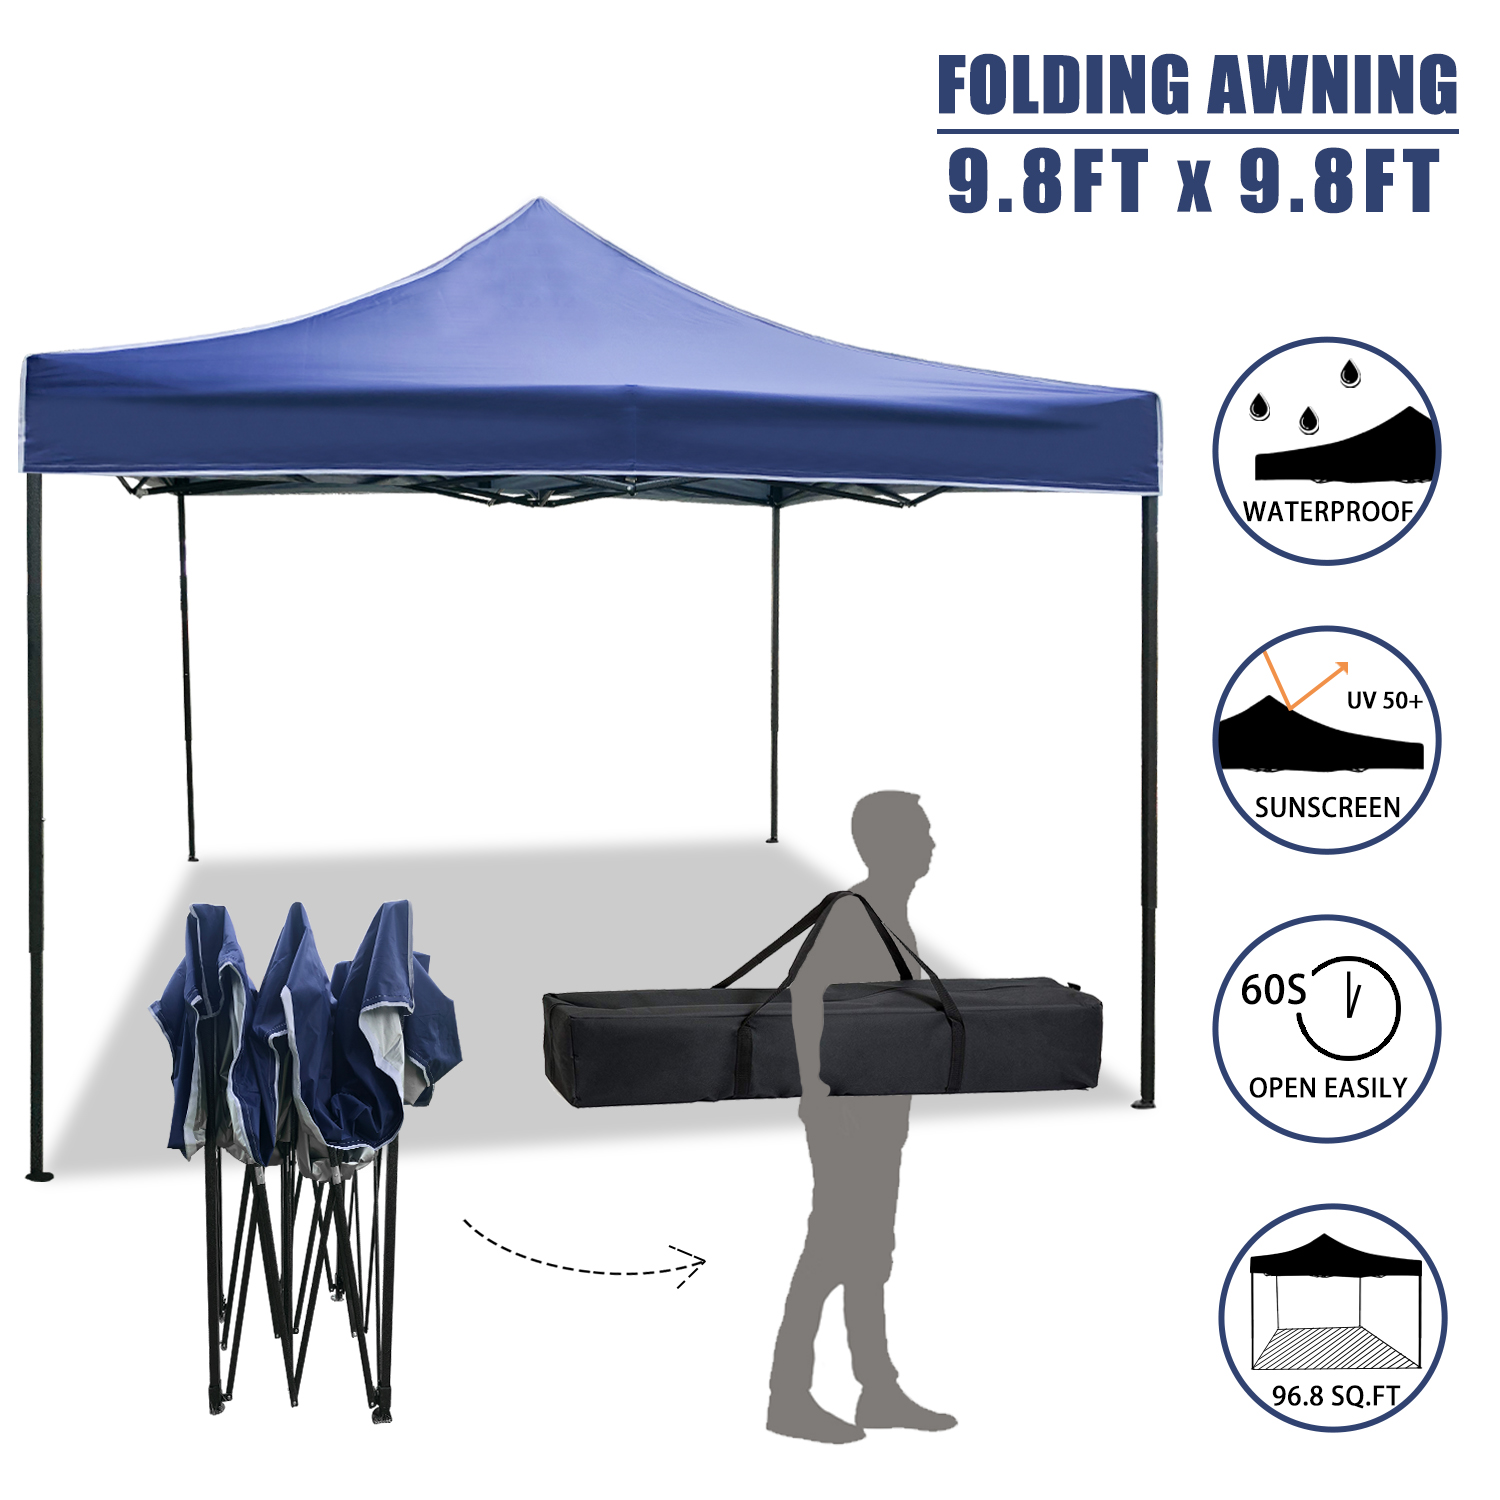 Pop up Canopy 10x10 Pop up Canopy Tent Folding Protable Ez up Canopy Sun Shade , 118.1 in, Blue - image 1 of 6